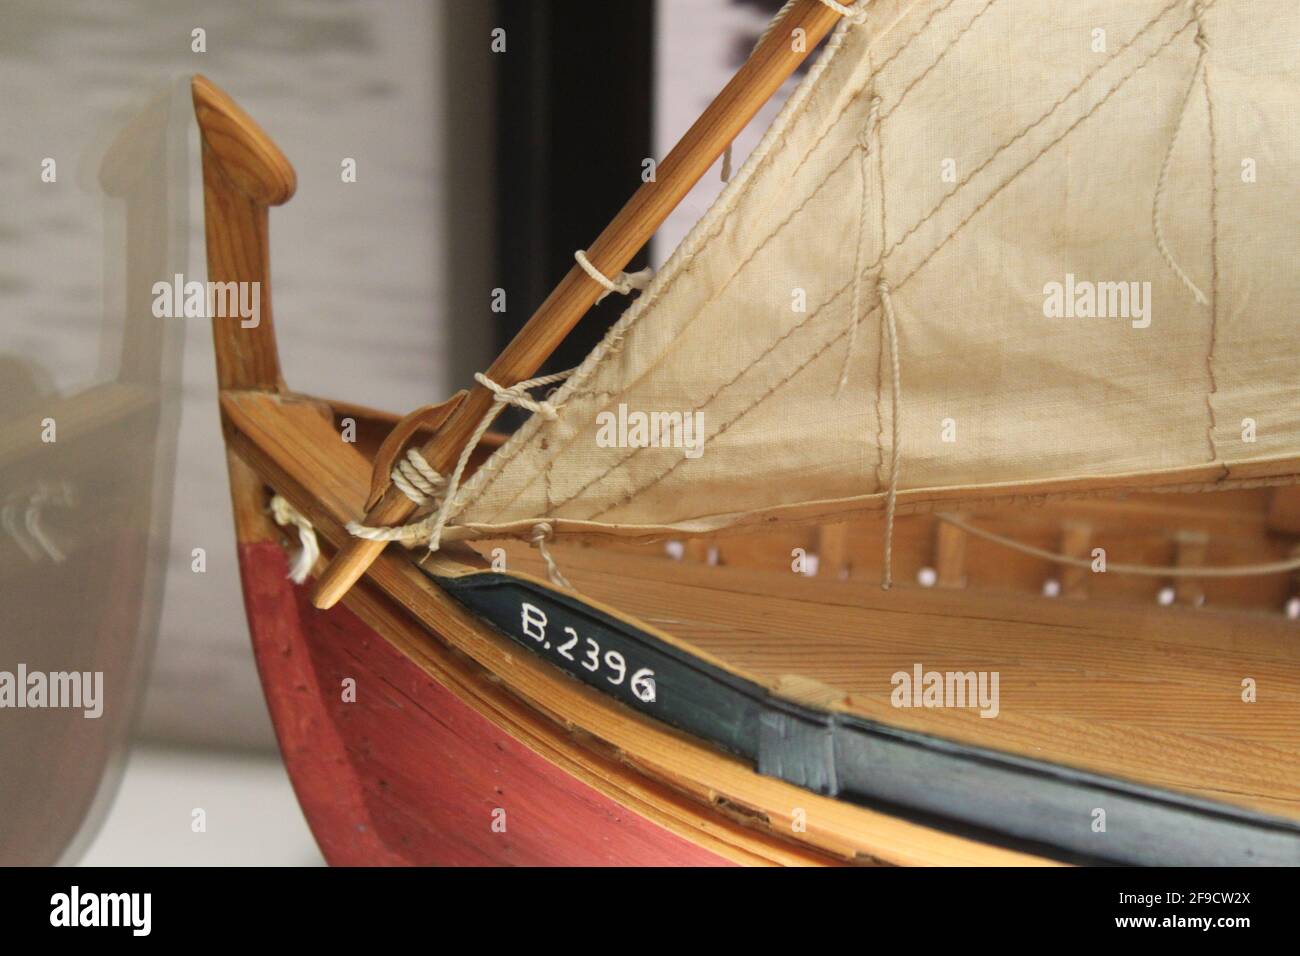 Stem of a traditional wooden fishing boat typical for the Mediterranean Stock Photo